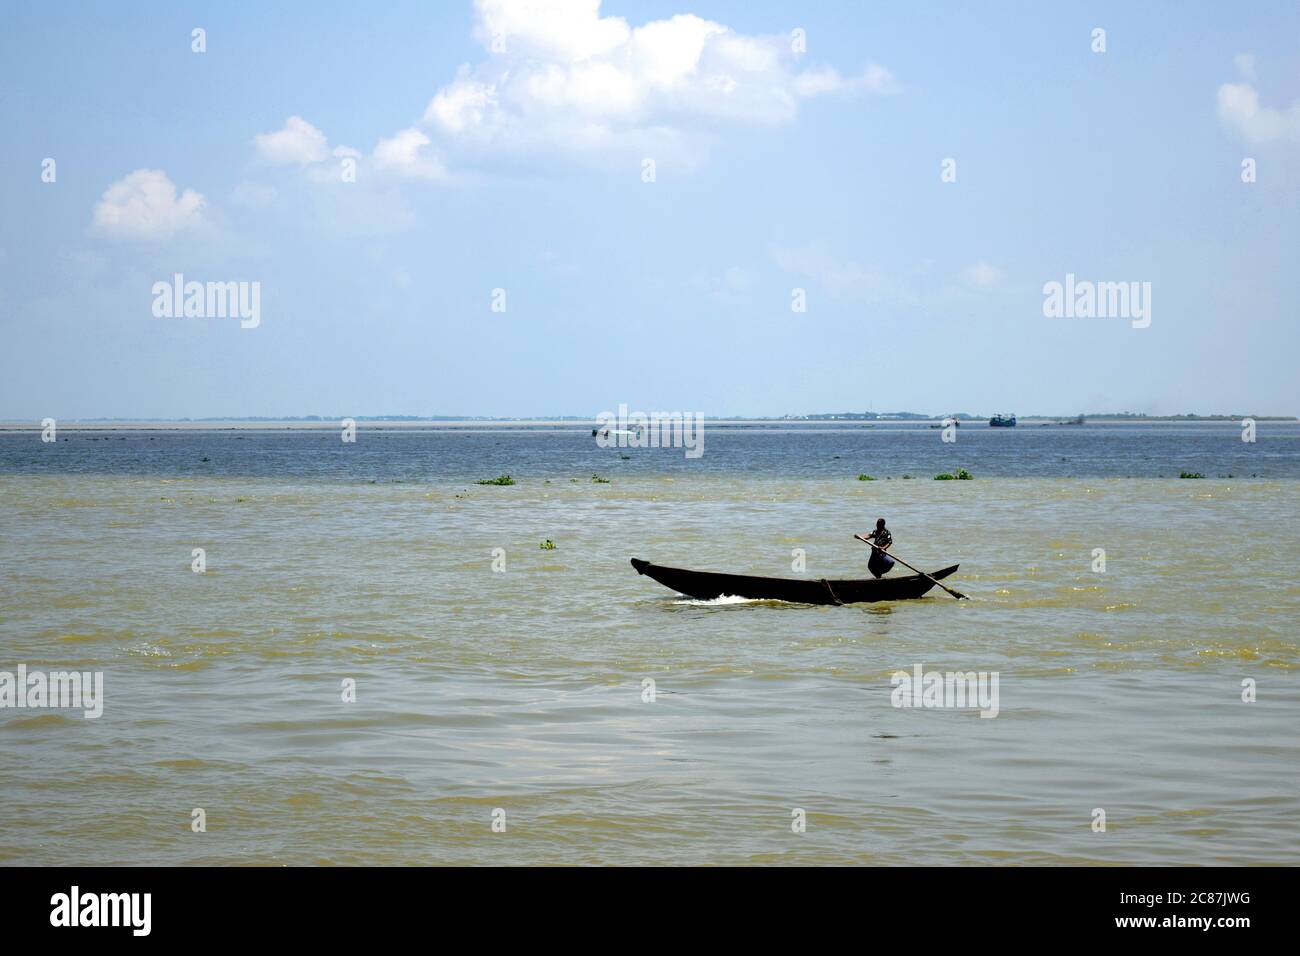 South Asian River Beauty and boat lifestyle Stock Photo